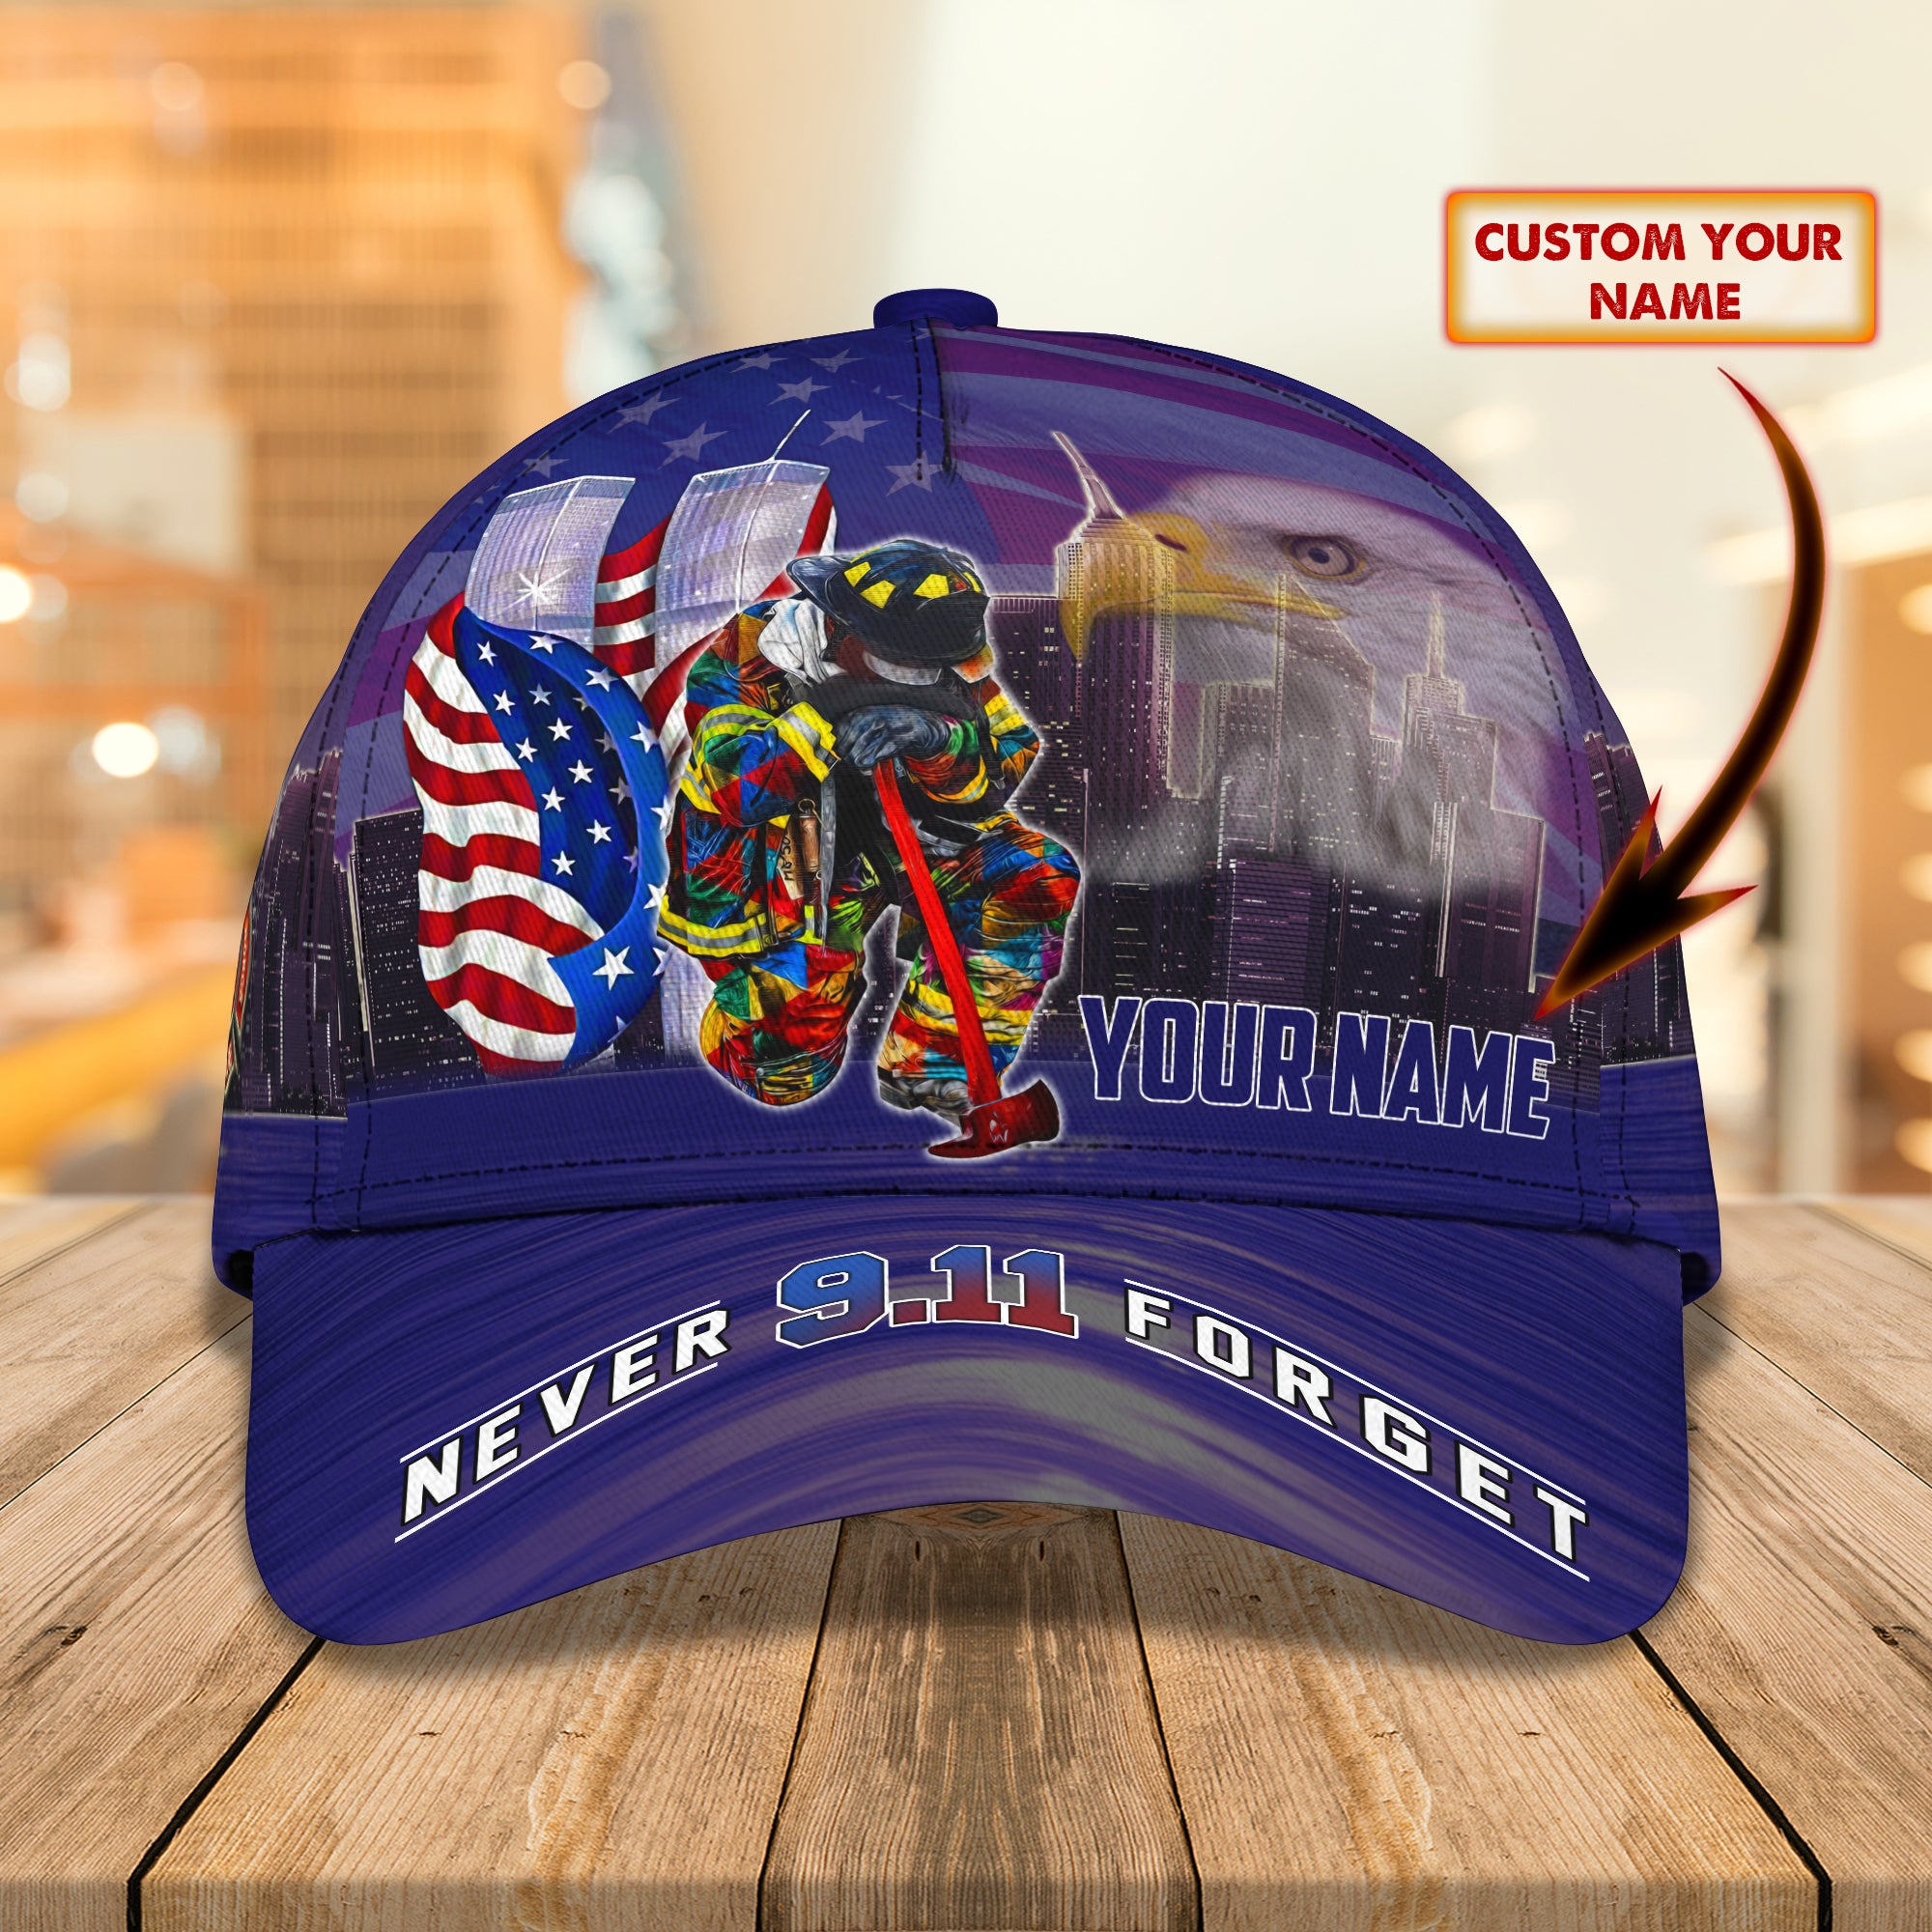 Firefighter - Personalized Name Cap 07 - CV98